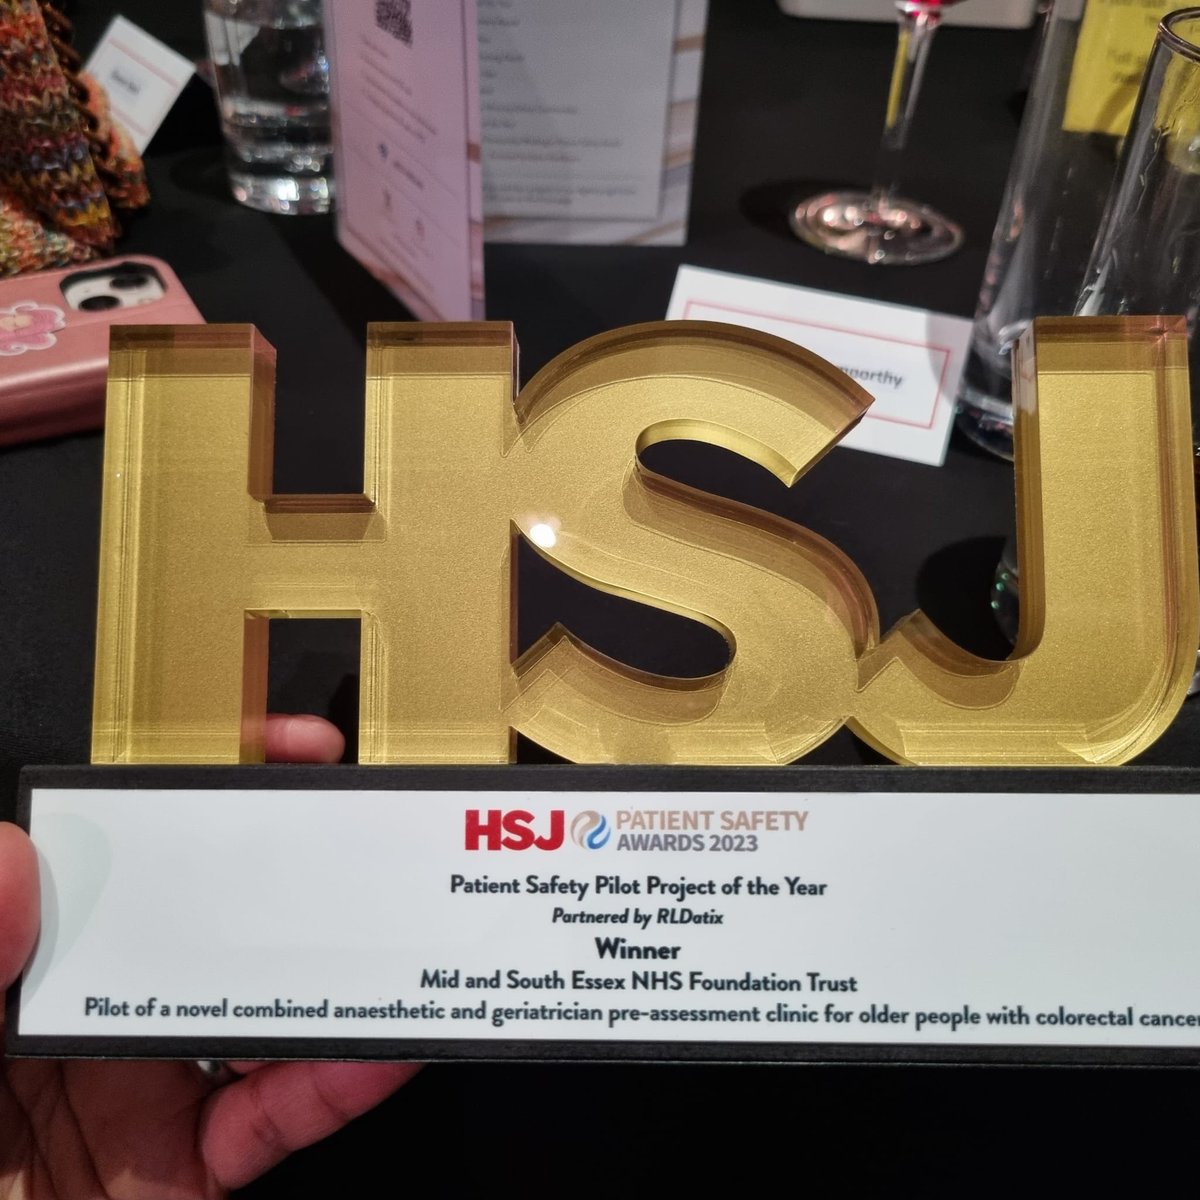 Congratulations to an amazing team! Transforming safe access to curative cancer surgery for Older Adults. Huge thanks to the amazing surgeons who couldn't make it. HSJ Award winners! @myuran_k5 @louisamaeb @MSEHospitals @GeriSoc #HSJpatientsafety #Preassessment #GeriatricGiants